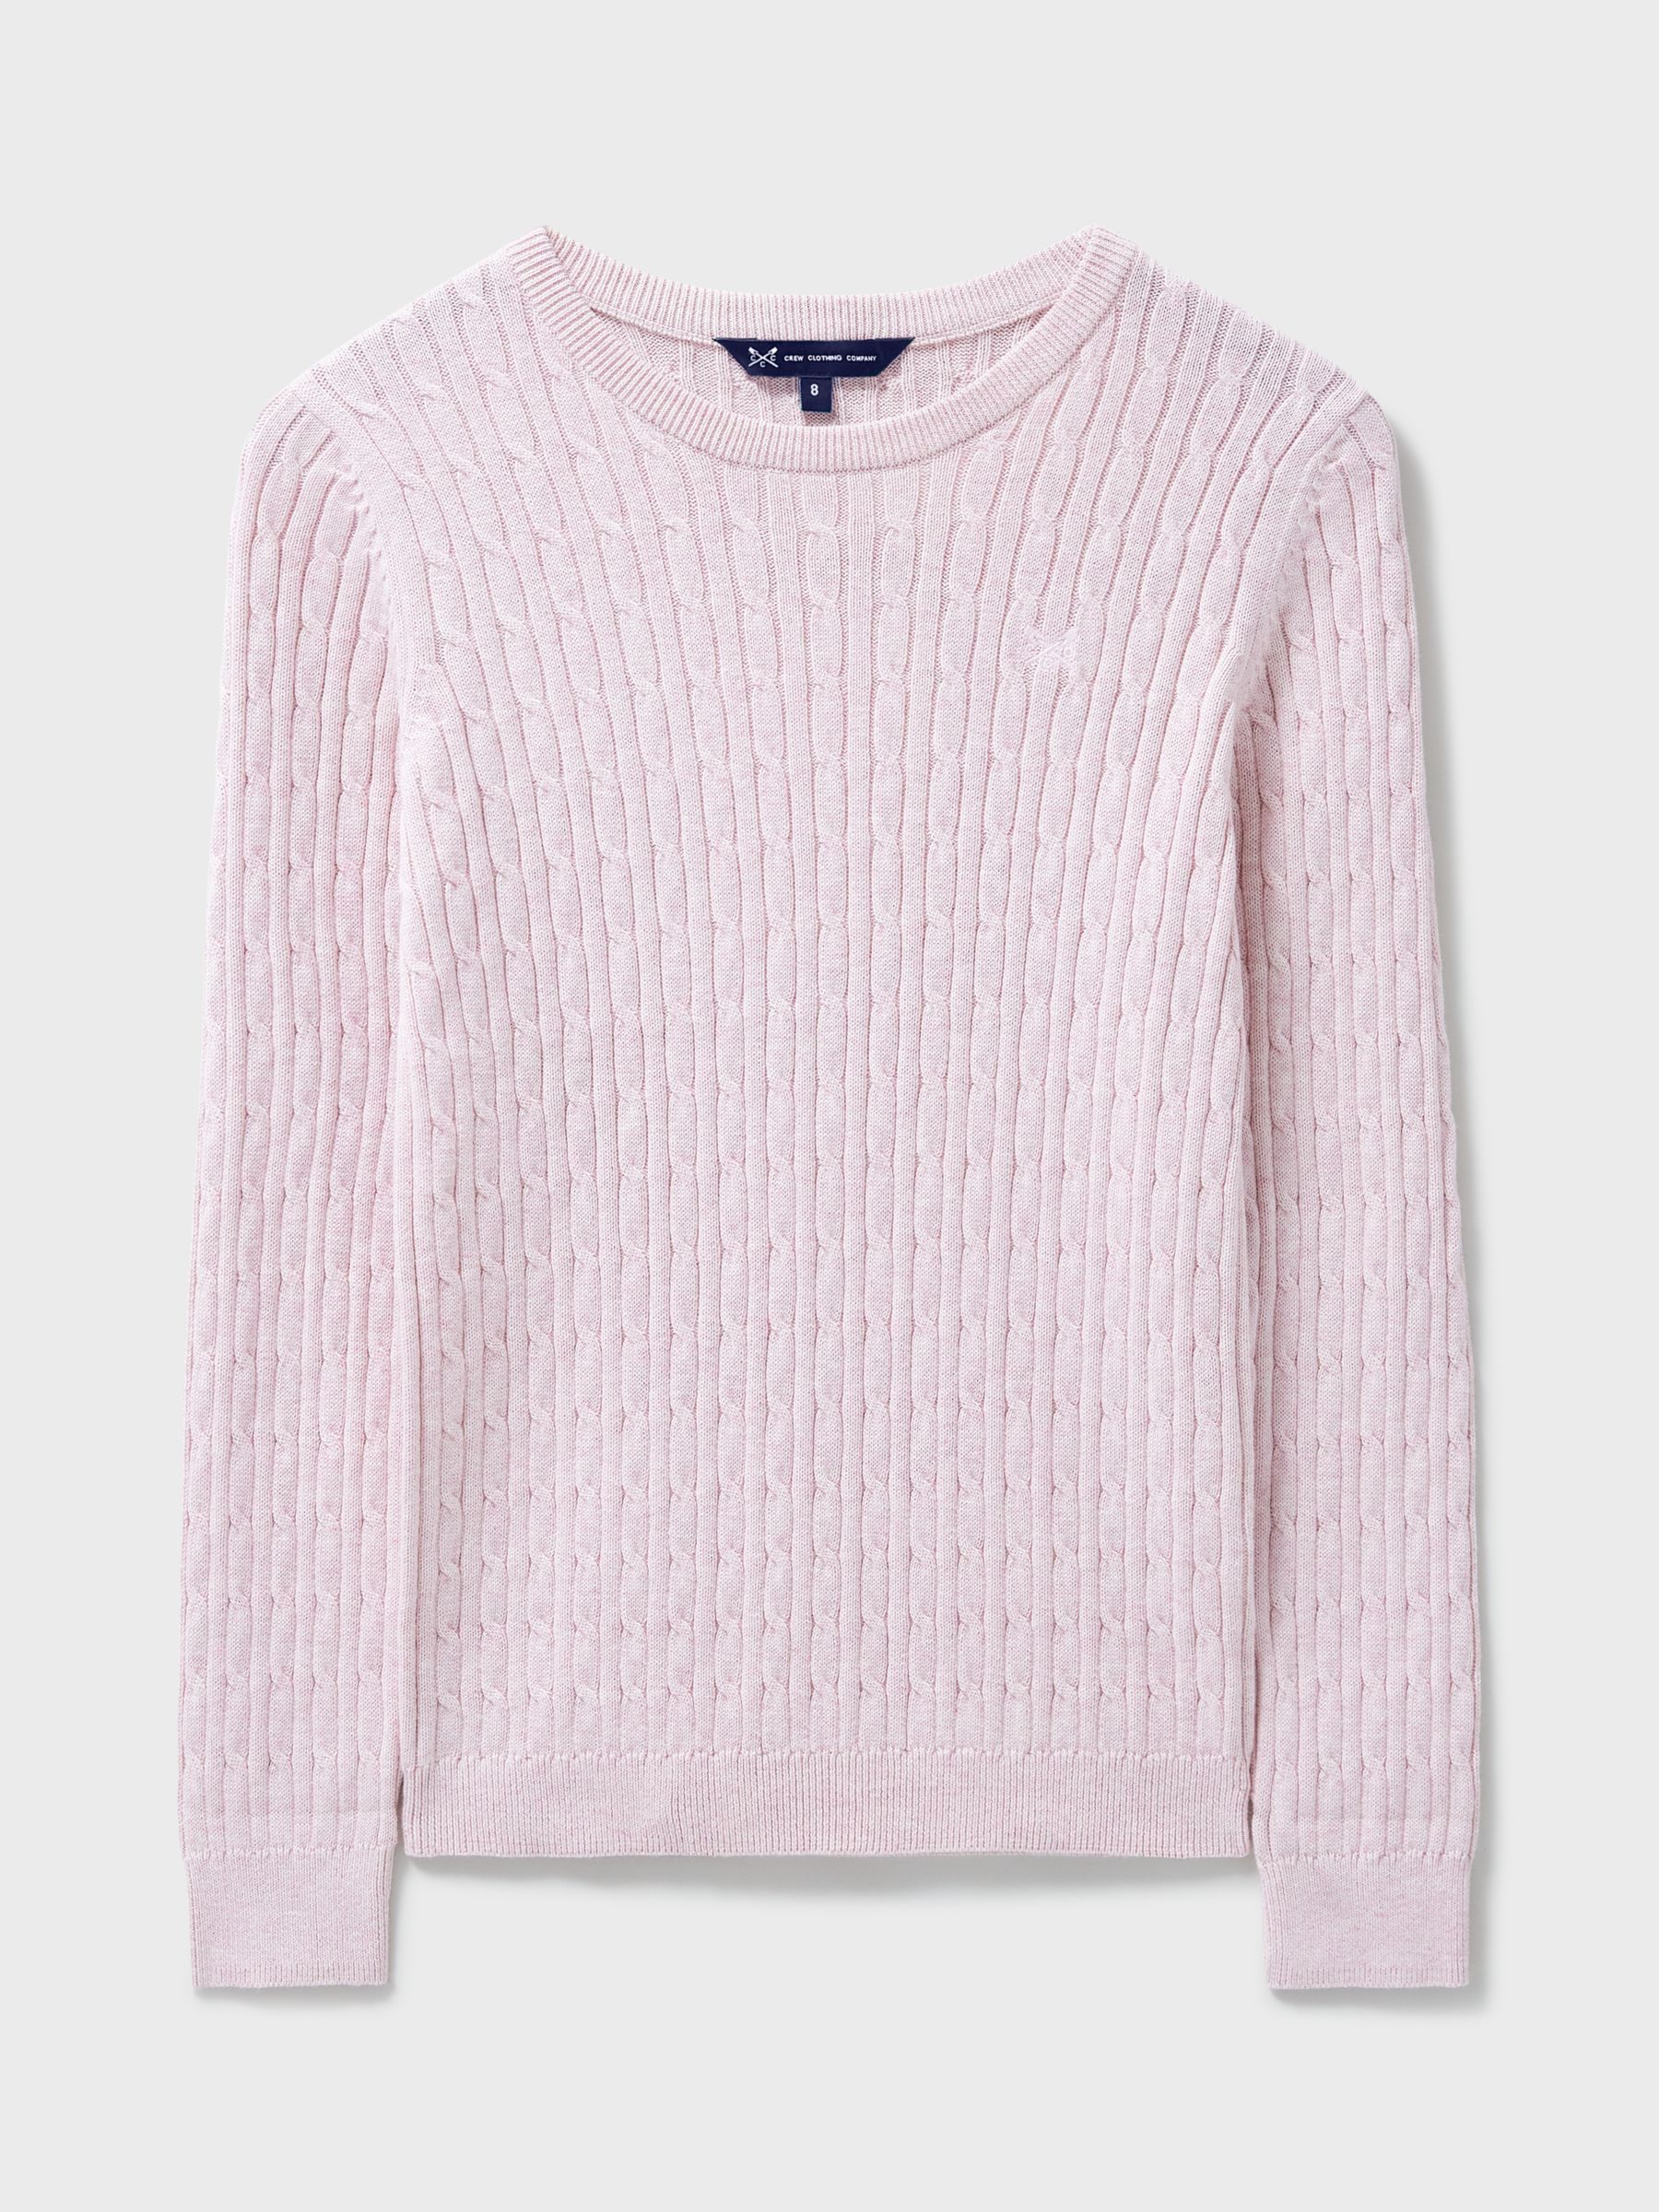 Crew Clothing Heritage Crew Neck Cable Knit Jumper, Pastel Pink, 8